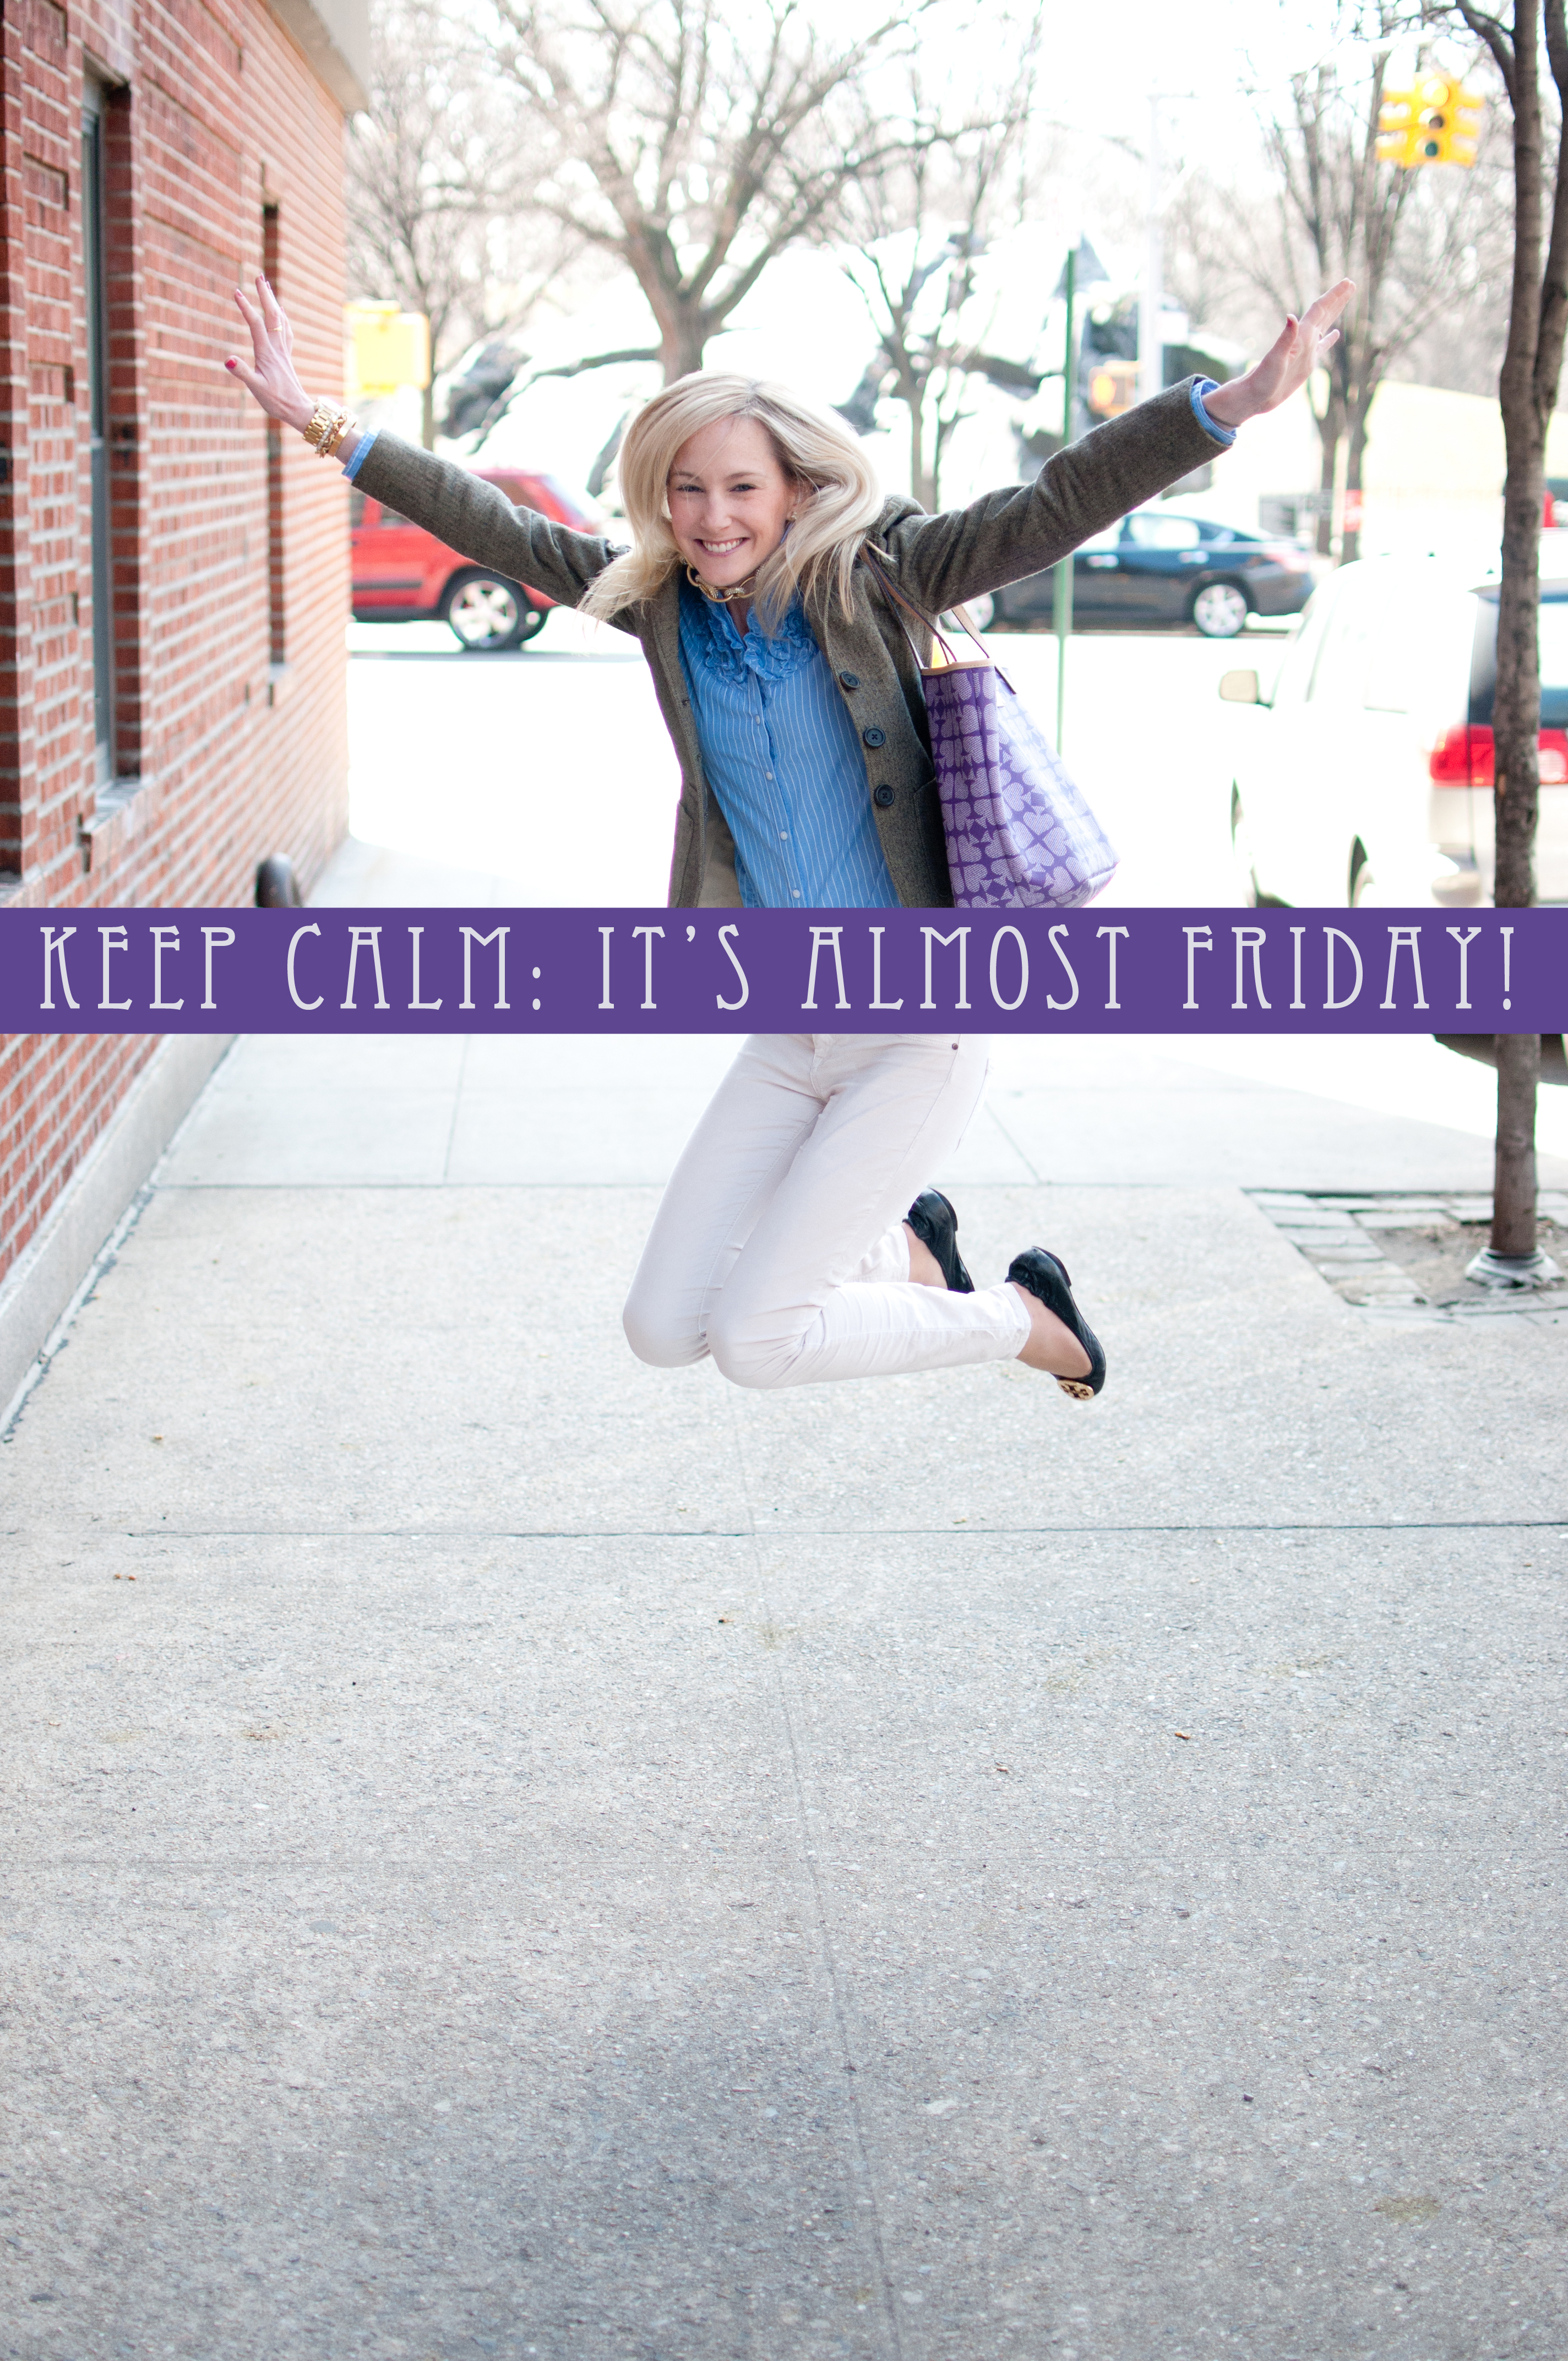 Keep Calm: It's Almost Friday www.kellyinthecity.com